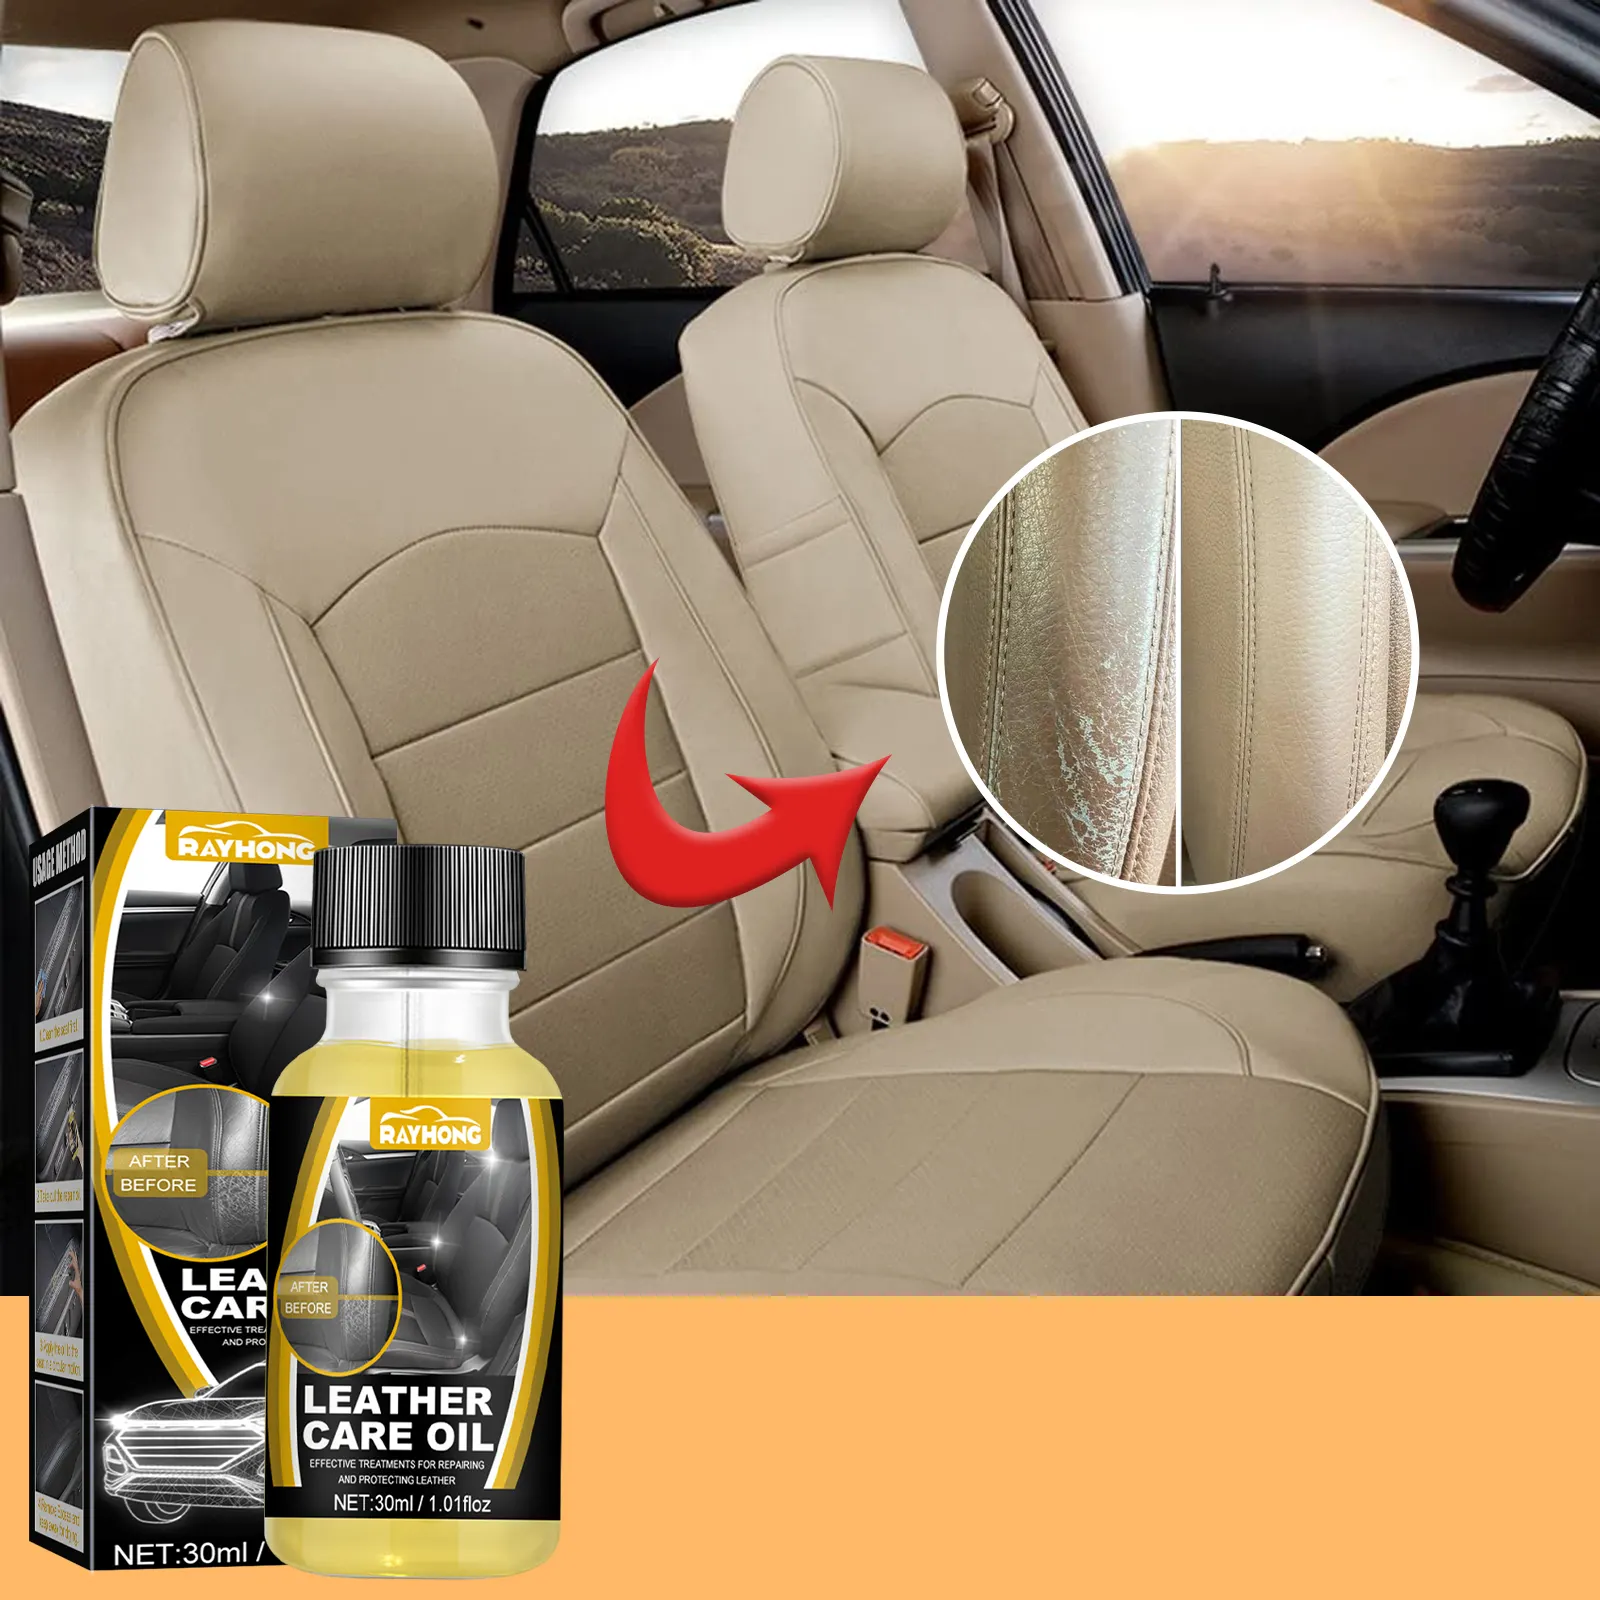 Rayhong Leather Care Products Car Interior Leather Care Kit Effective Leather Care Oil